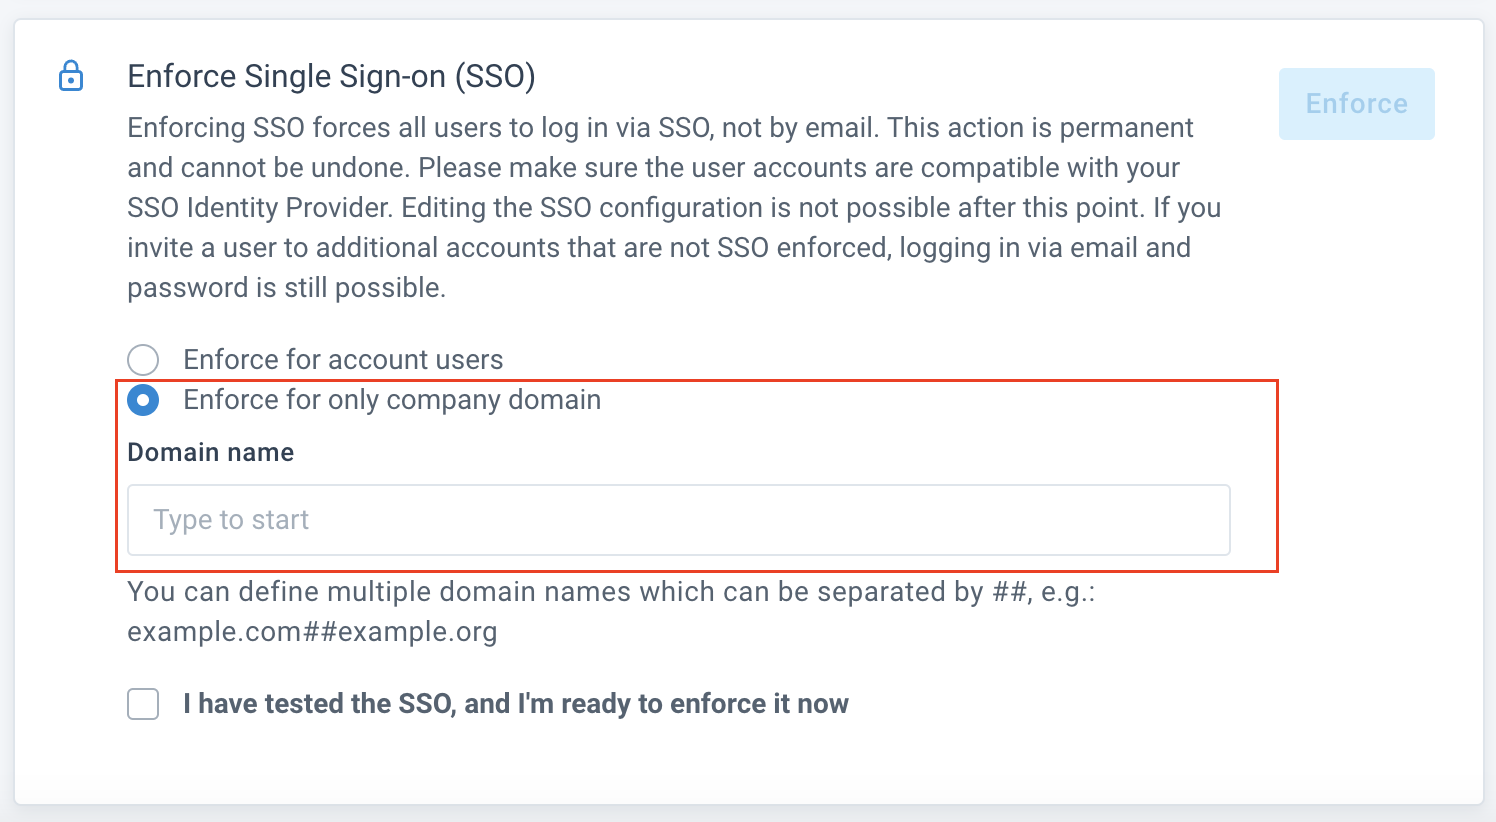 SSO enforcement for only company domains